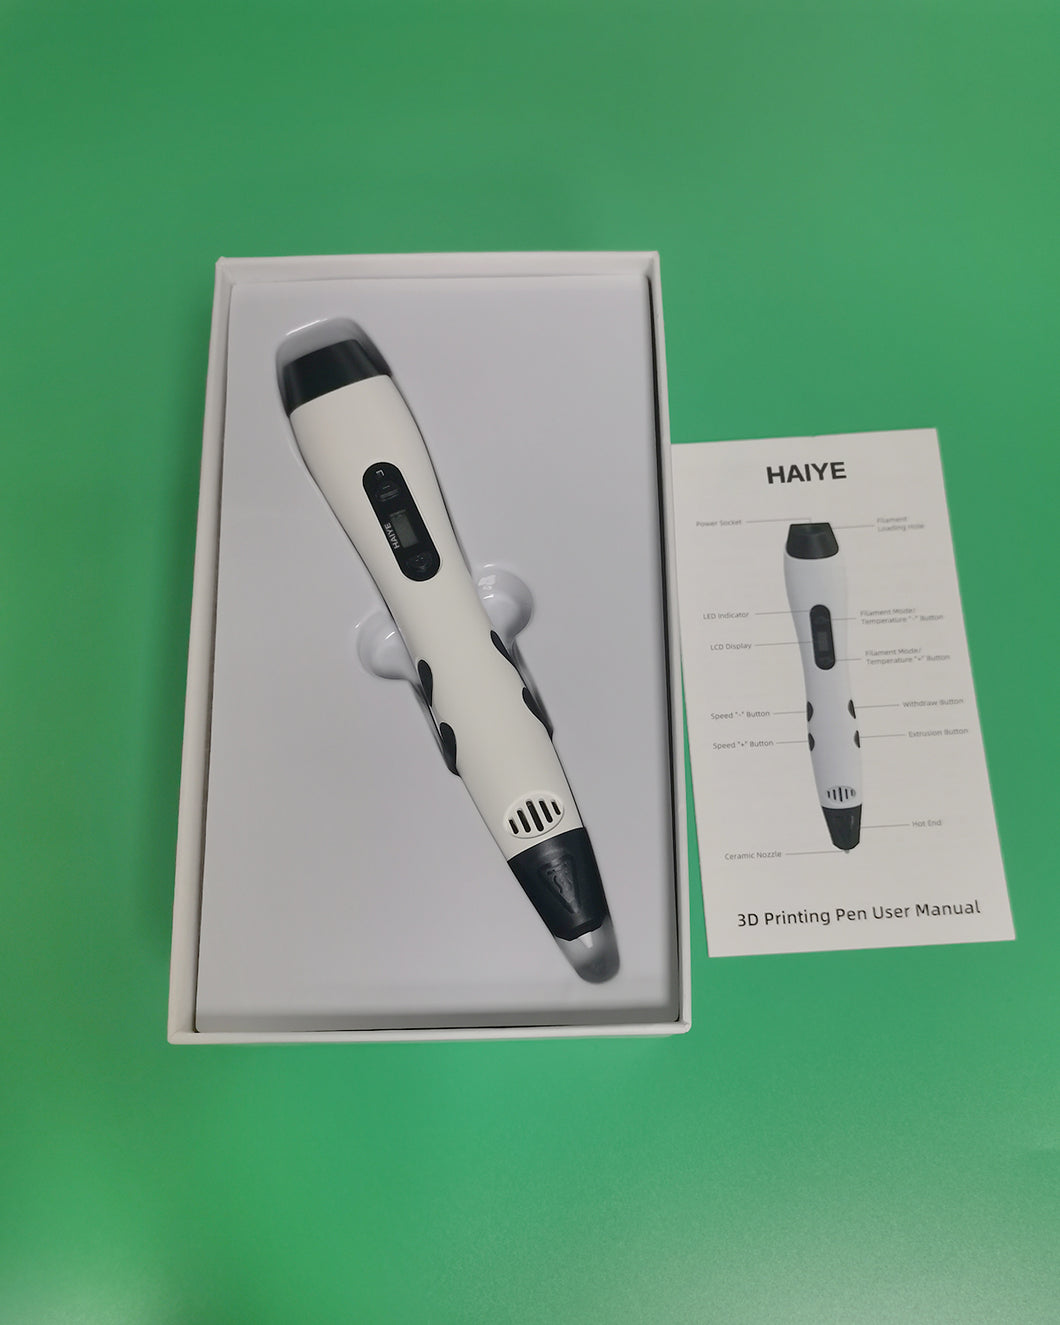 HAIYE 3D Printing Pen -Starter Colors of Filament, Stencil Book + Project Guide, and Charger